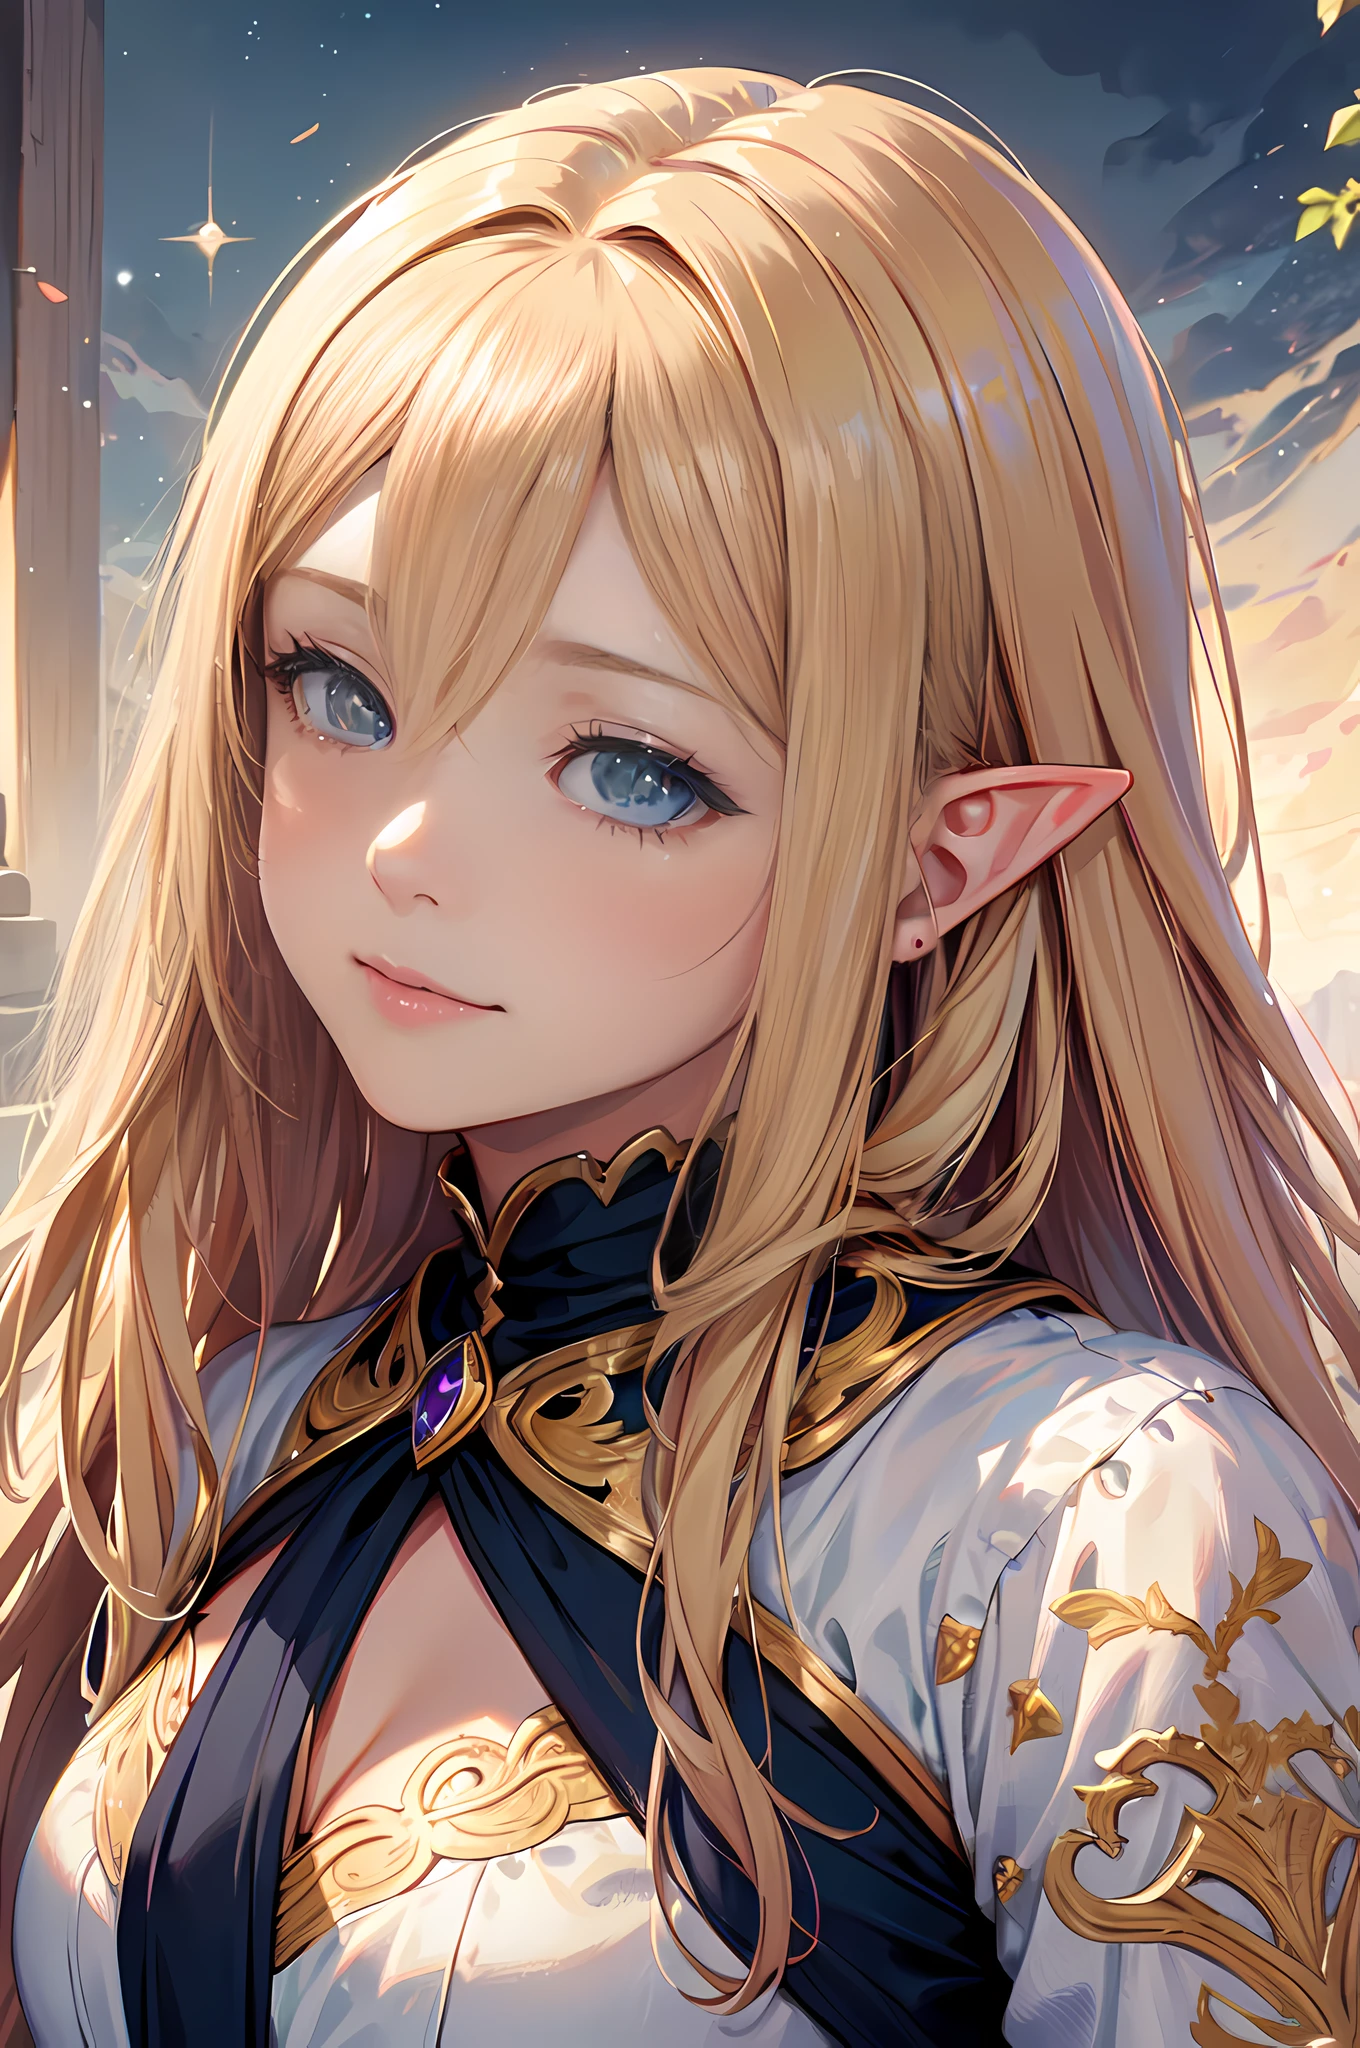 (best quality,ultra-detailed),(realistic:1.37) portrait of a cute girl with mesugaki hairstyle. She has a beautiful face, with mesmerizing eyes and luscious long blond hair. She embodies the essence of an elf, radiating a magical aura. The portrait captures her innocence and charm, highlighting her cute features and captivating smile. The artwork is created using a medium of exquisite digital painting, which brings out the intricate details and vibrant colors. The lighting is soft and gentle, illuminating her face with a warm glow. The overall color palette is delicate, with pastel tones that add to the dreamy atmosphere. The high-resolution artwork showcases the finest craftsmanship and attention to detail, making it a true masterpiece.